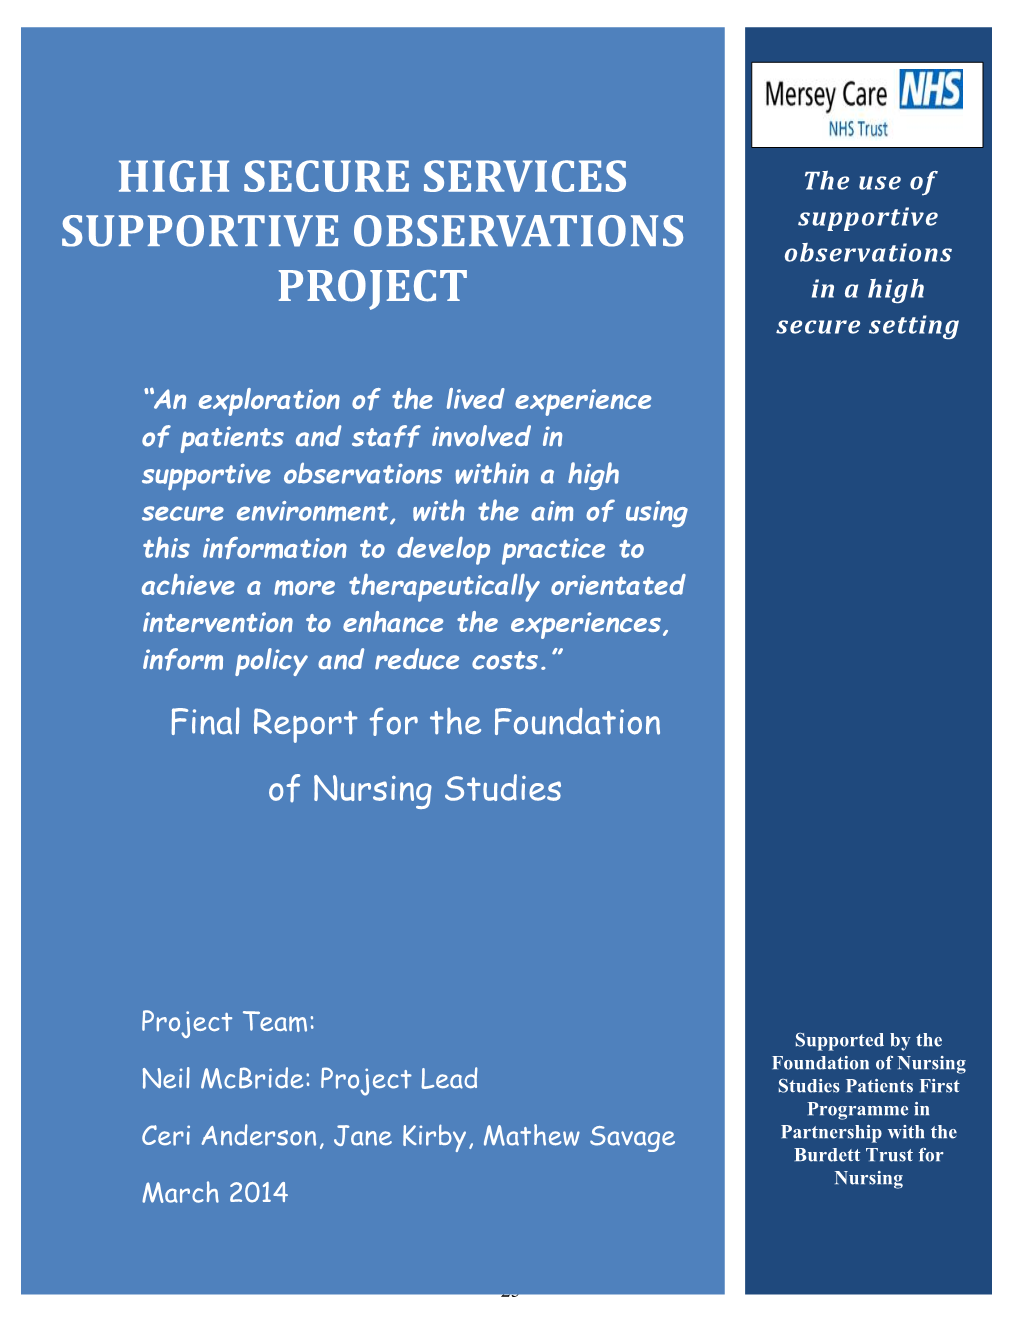 High Secure Services Supportive Observation Project